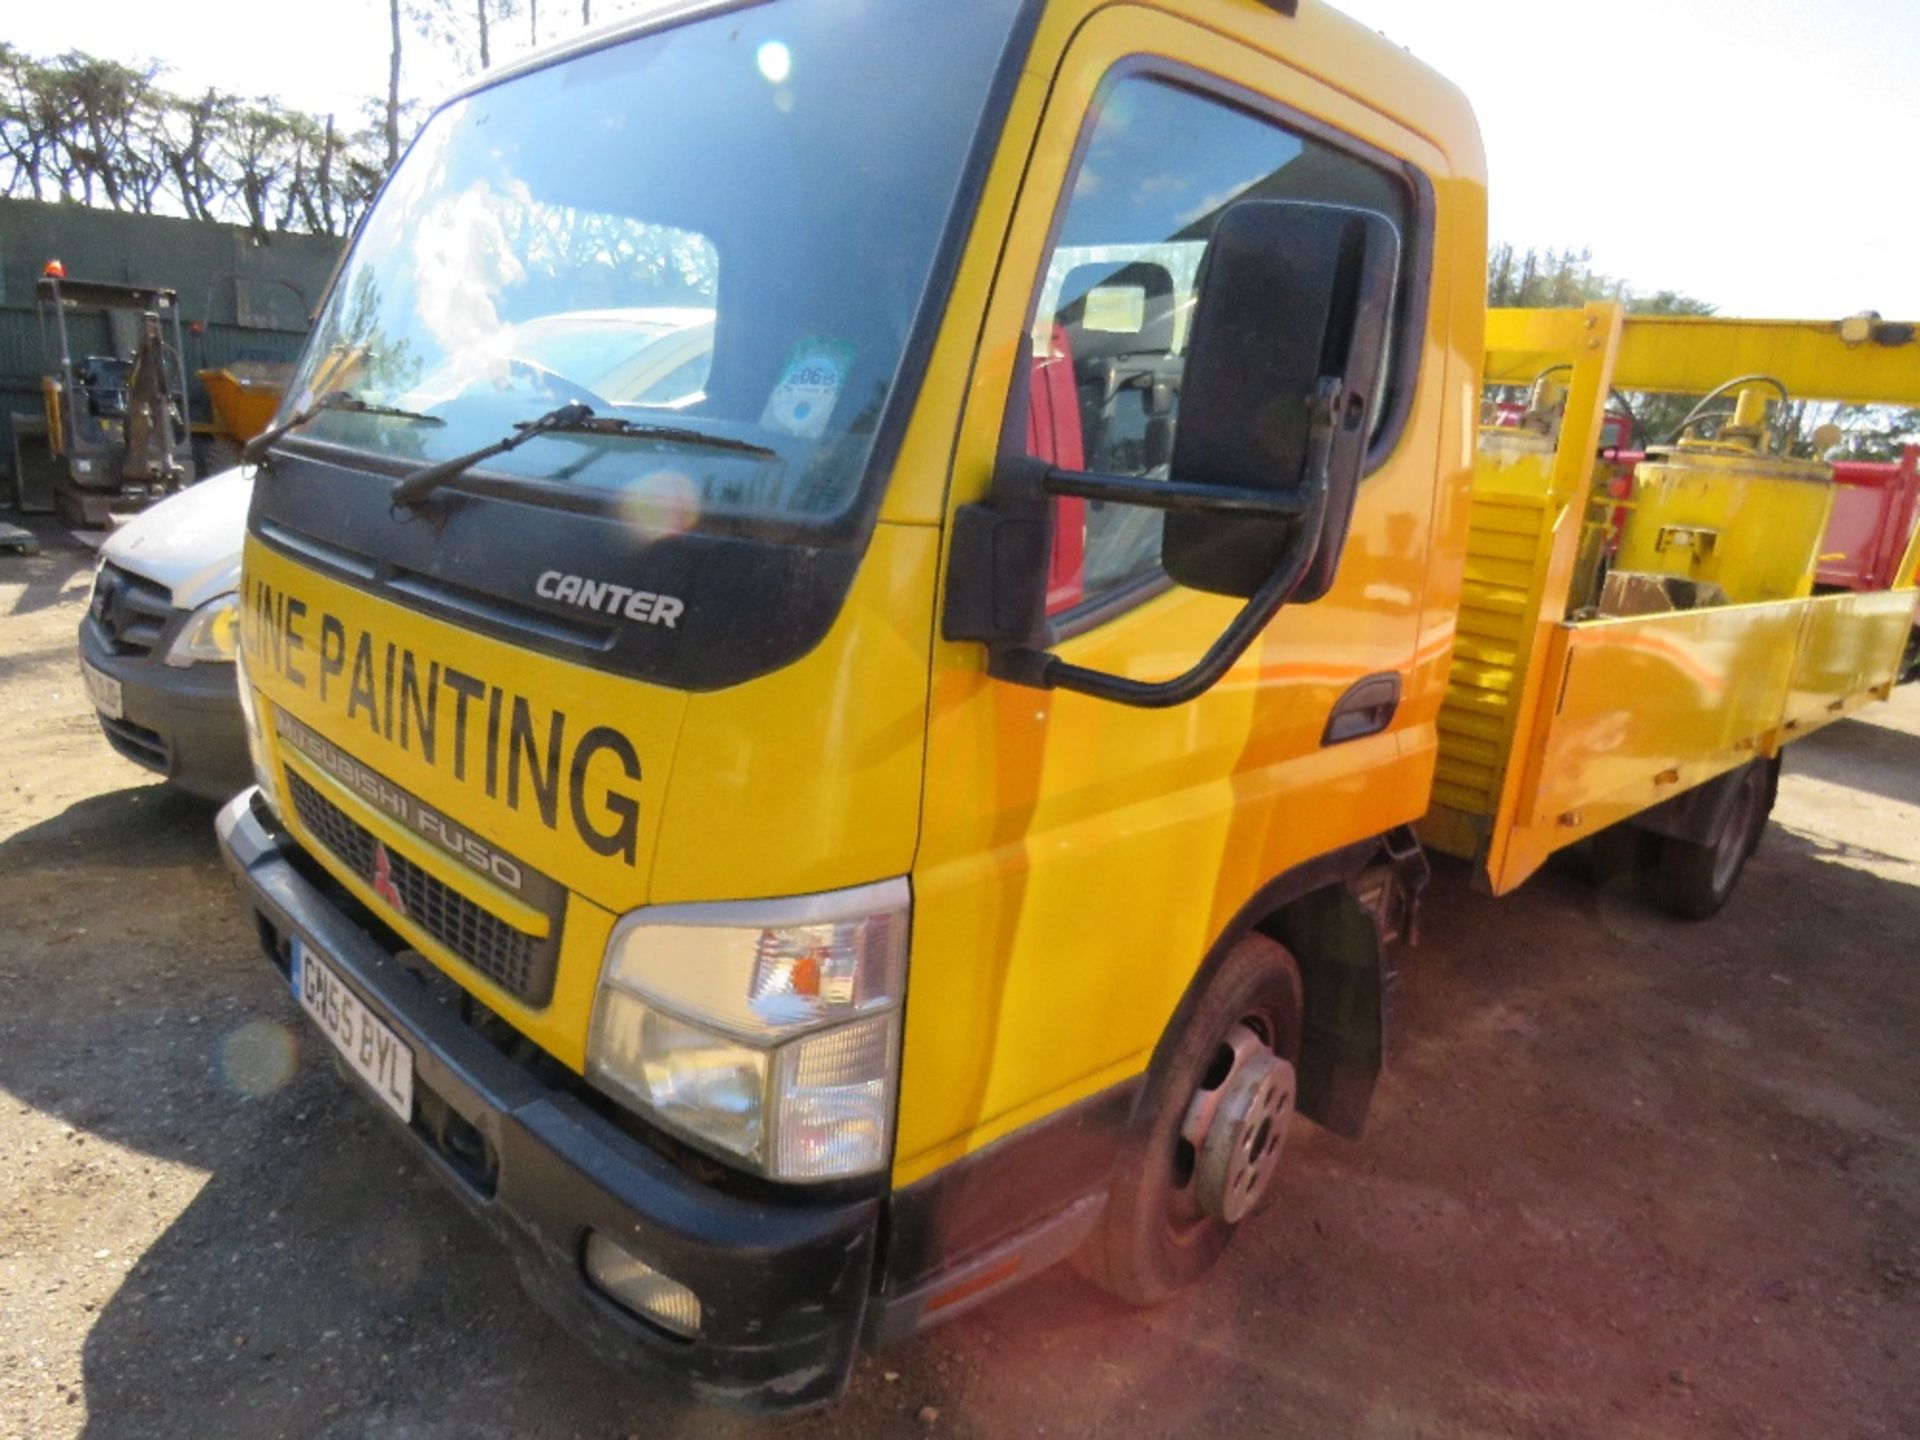 MITSUBISHI FUSO CANTER WHITE LINING TRUCK. REG:GN55 BYL. TEST TILL 17TH JUNE 2021. 112,751 REC MILES - Image 12 of 12